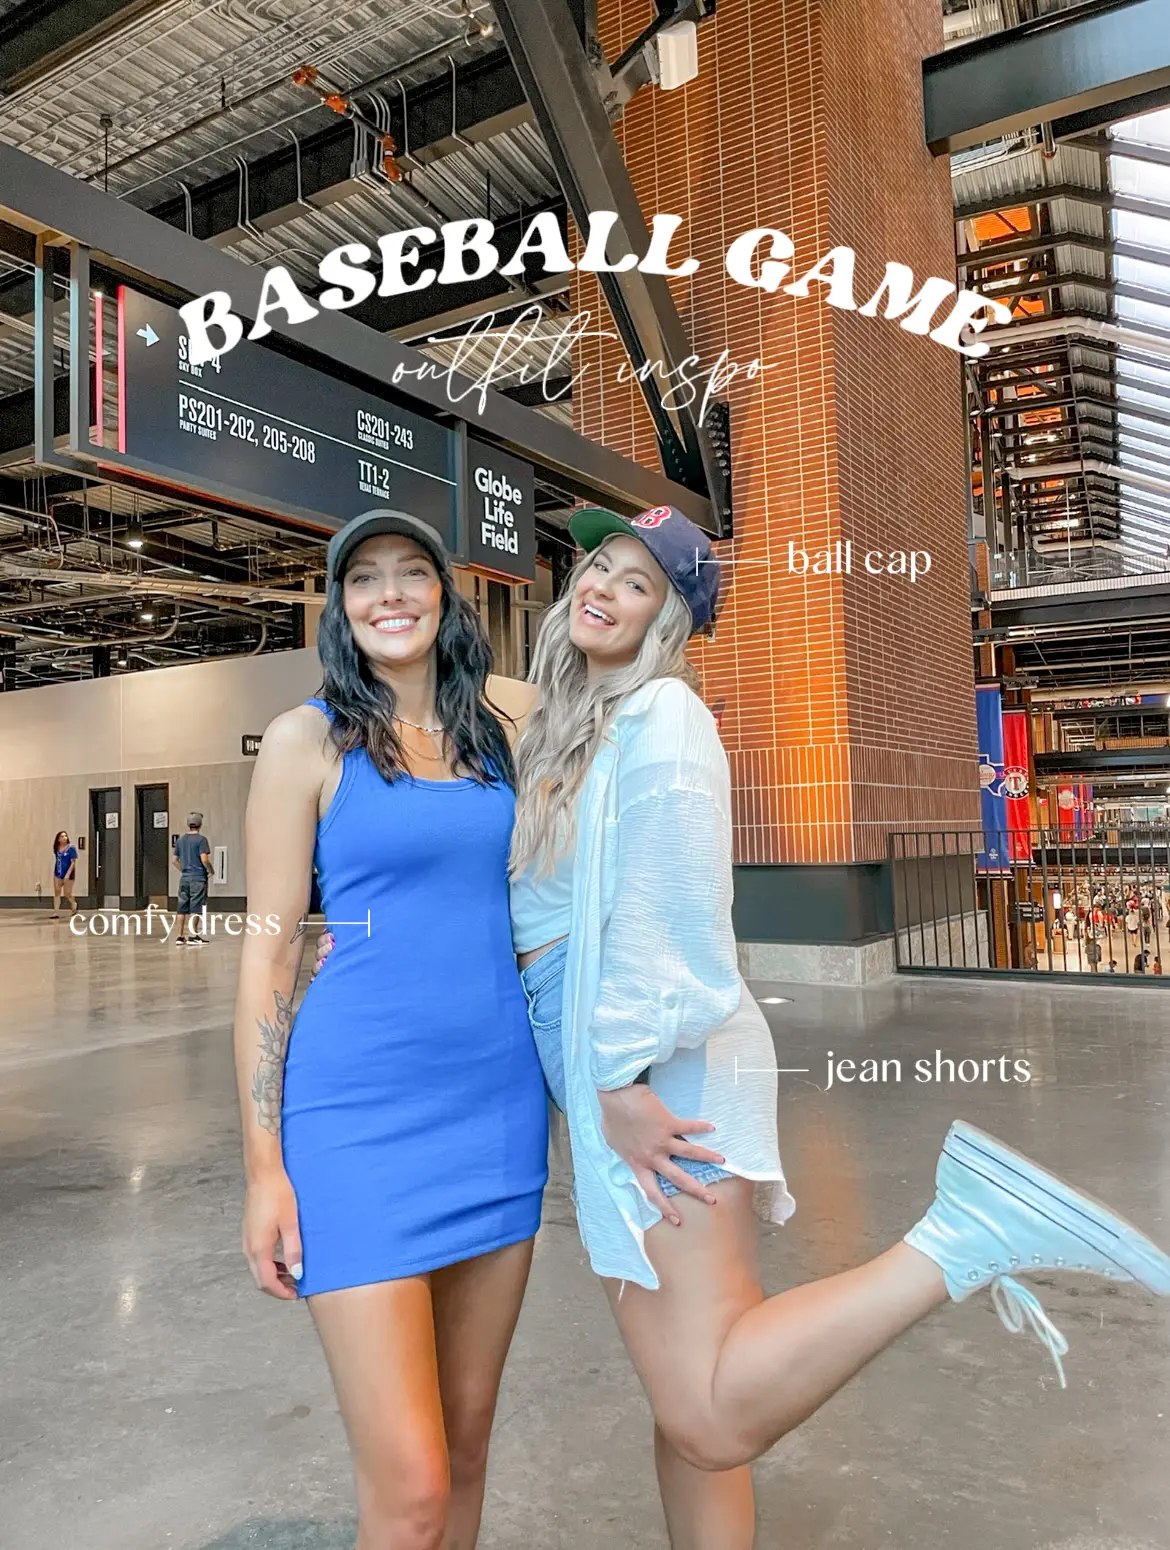 baseball game outfit inspo⚾️, Gallery posted by kenzie_adams99